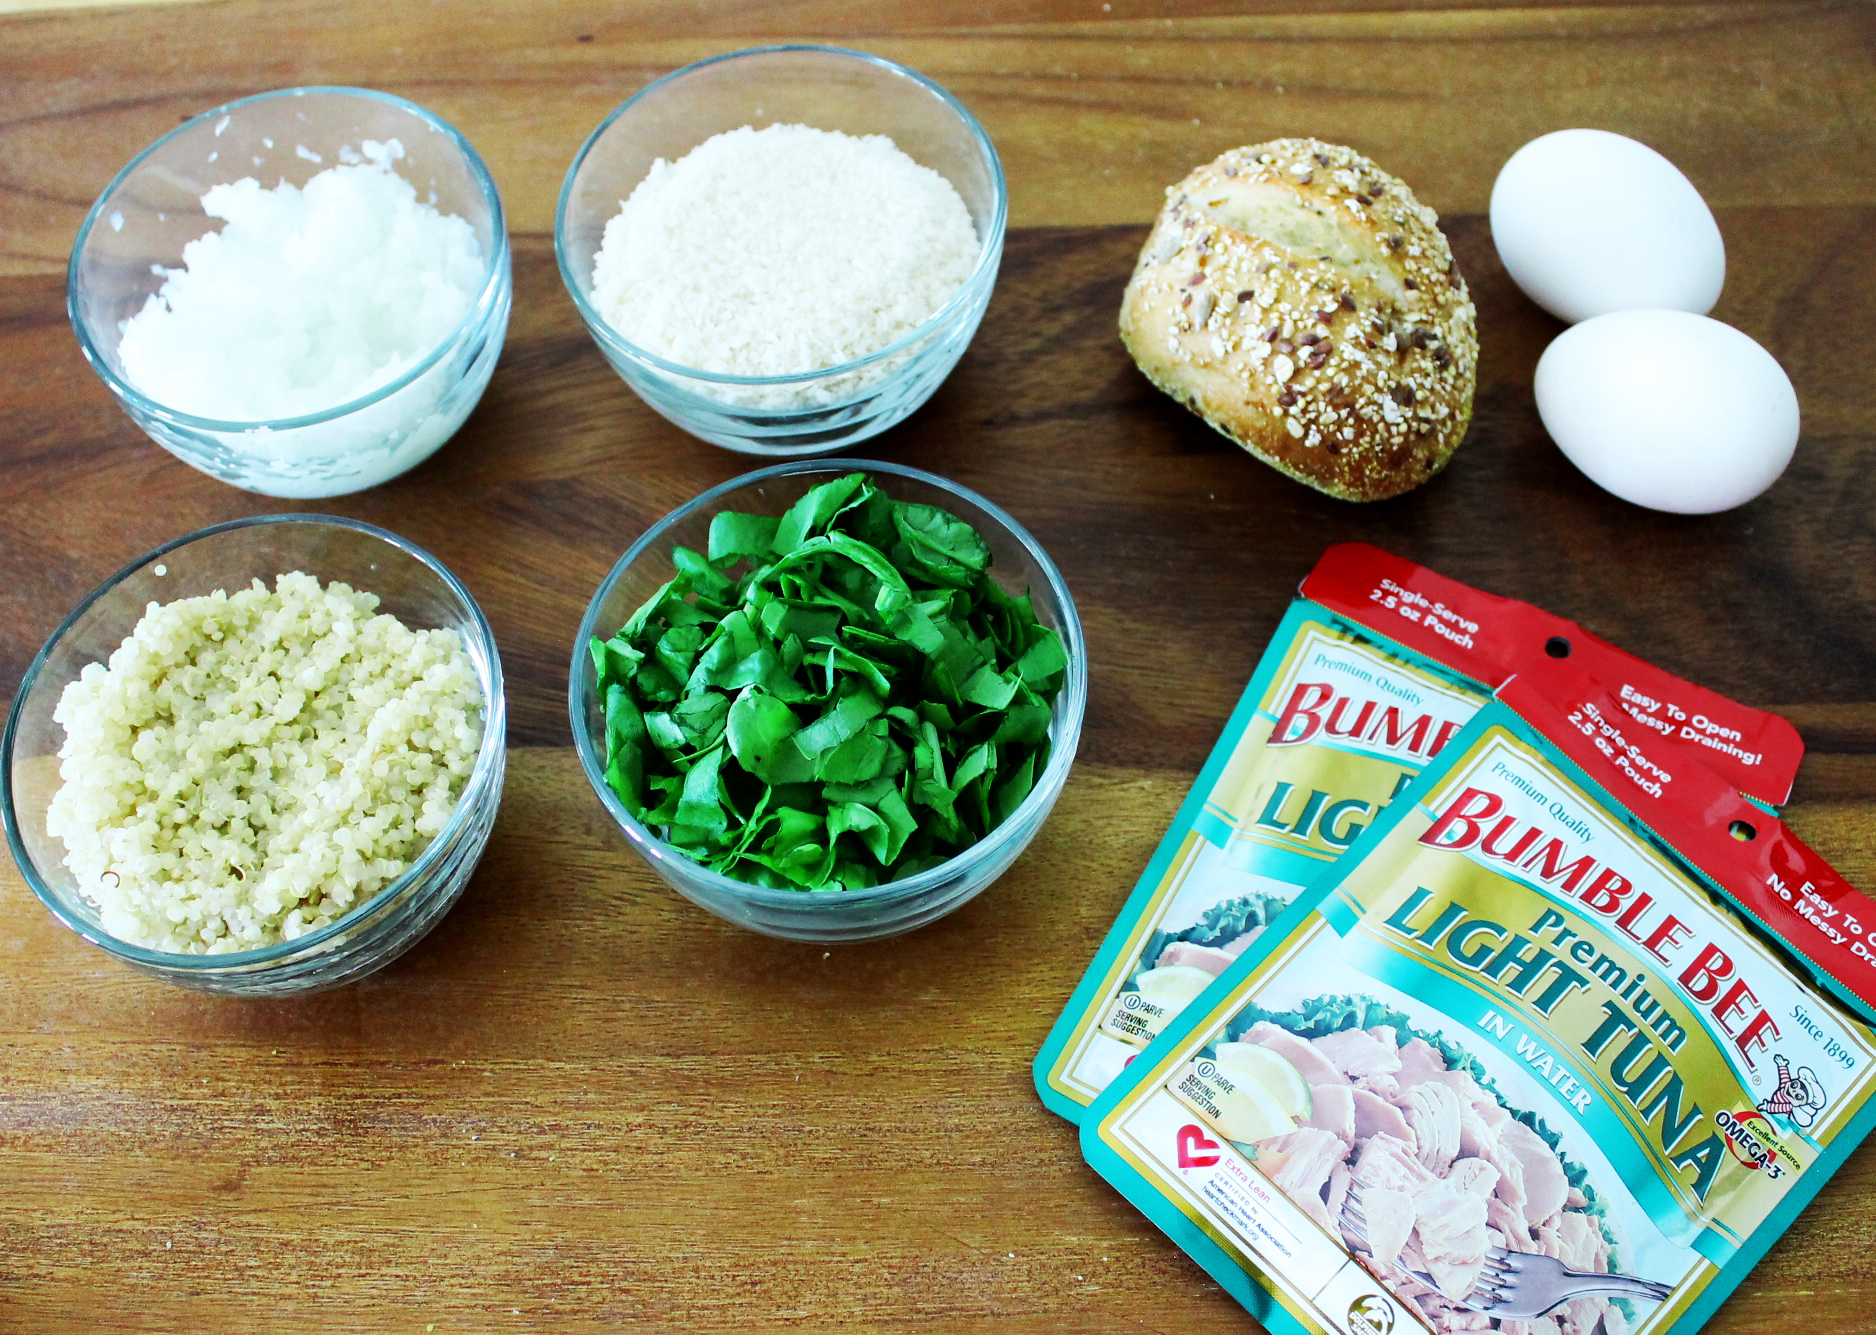 Ingredients for tuna and quinoa patties.